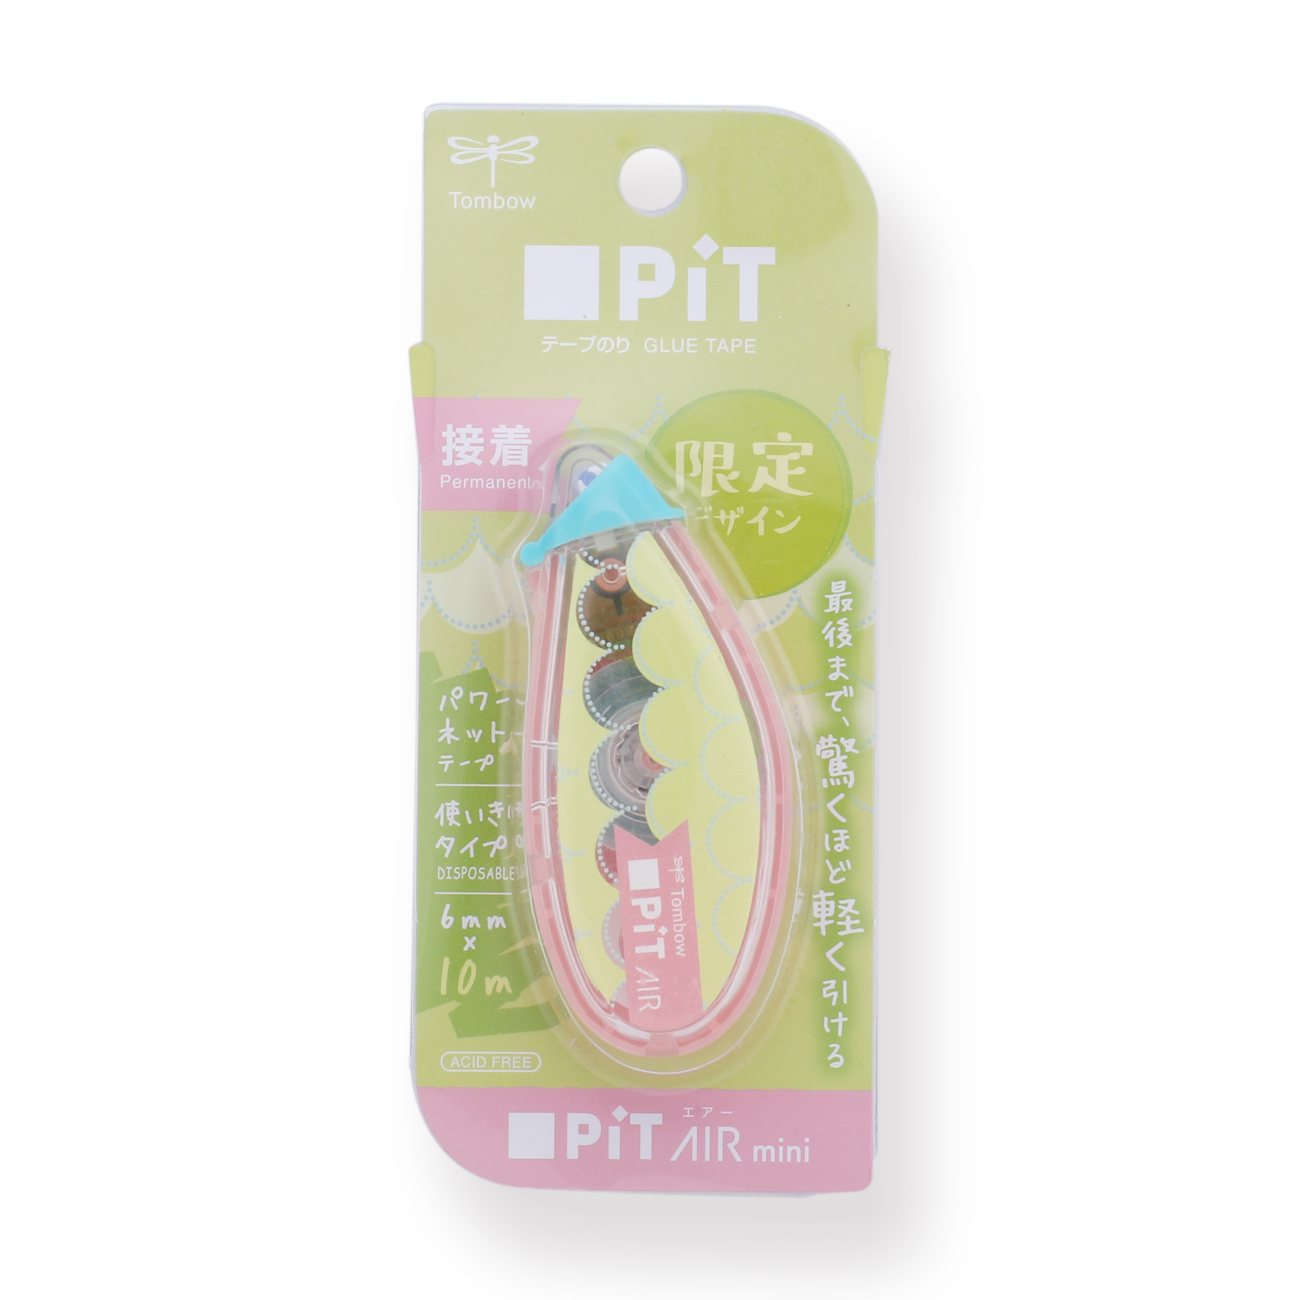 Tombow Pit Air Mini Limited Glue Tape - Wavy Green - Stationery Pal